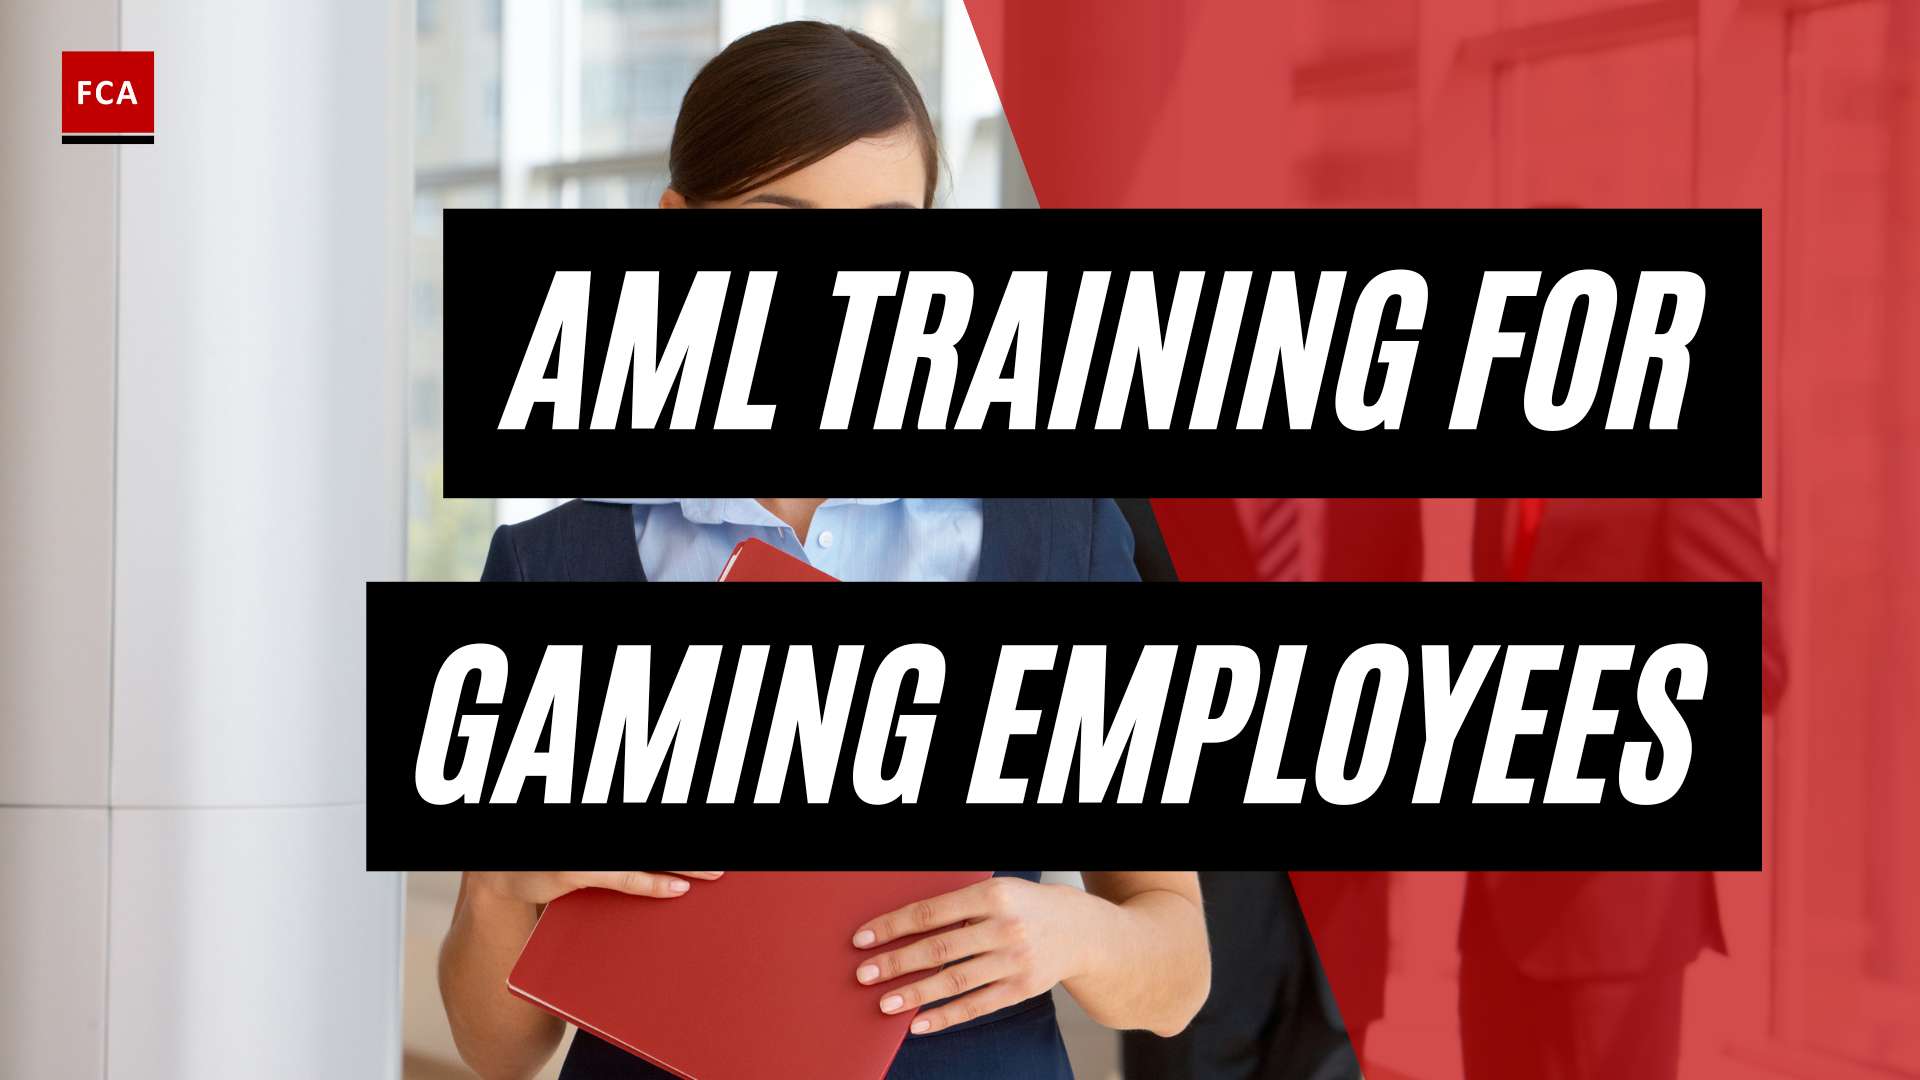 Playing It Safe: Aml Training For Gaming Industry Personnel